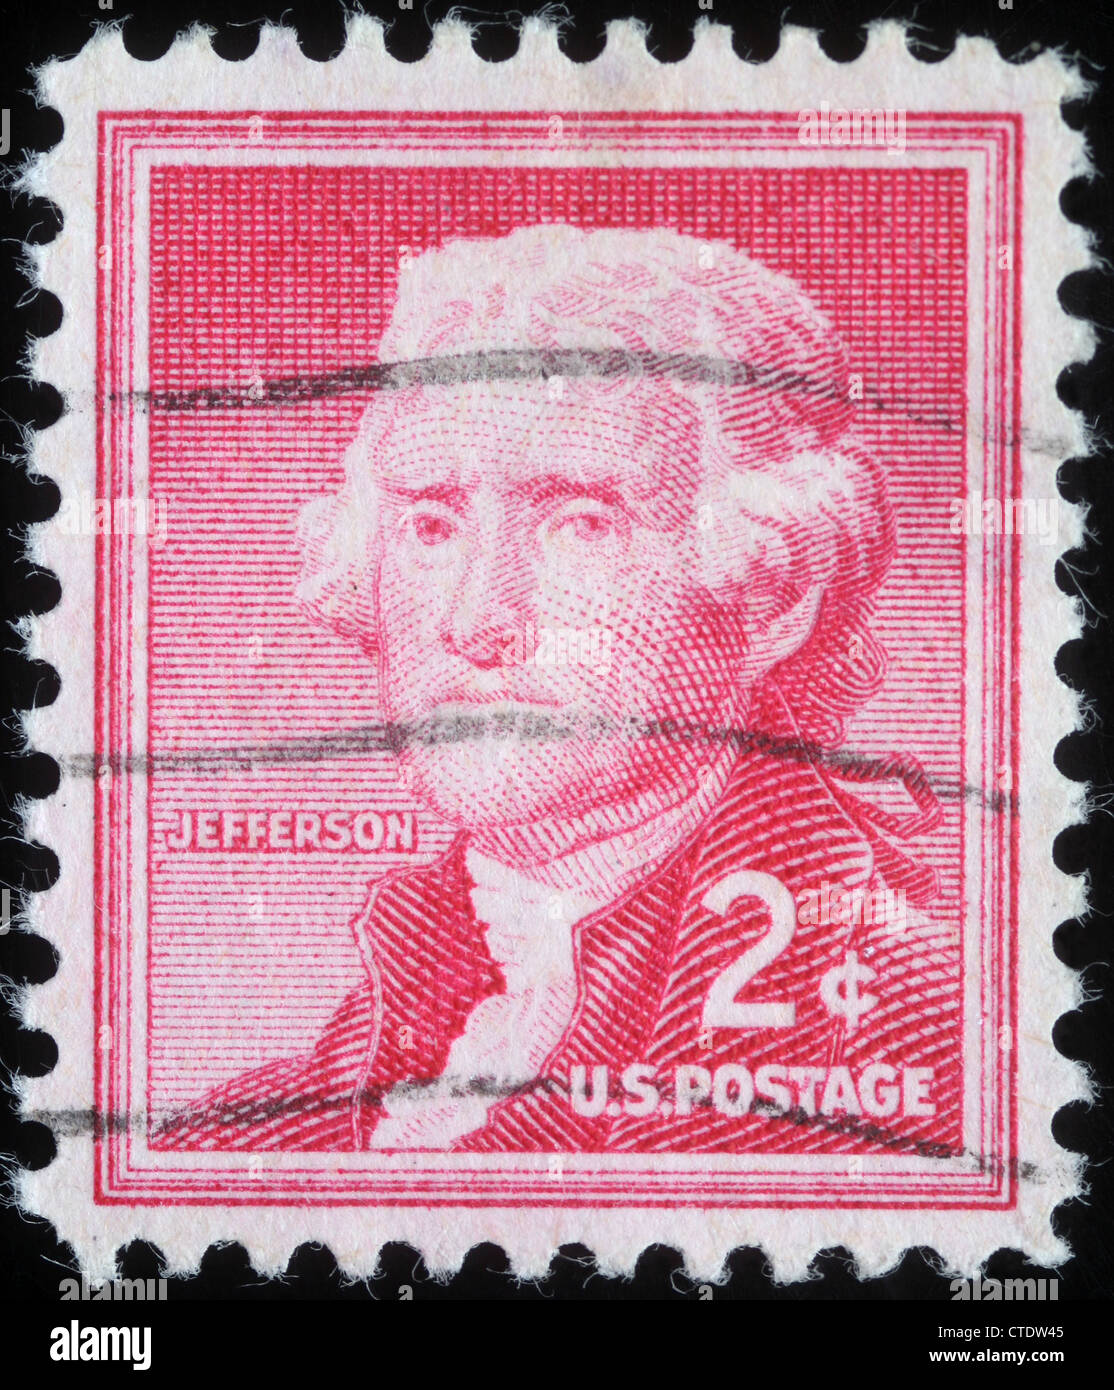 UNITED STATES OF AMERICA - CIRCA 1954: a stamp printed in the United States of America shows Thomas Jefferson Stock Photo